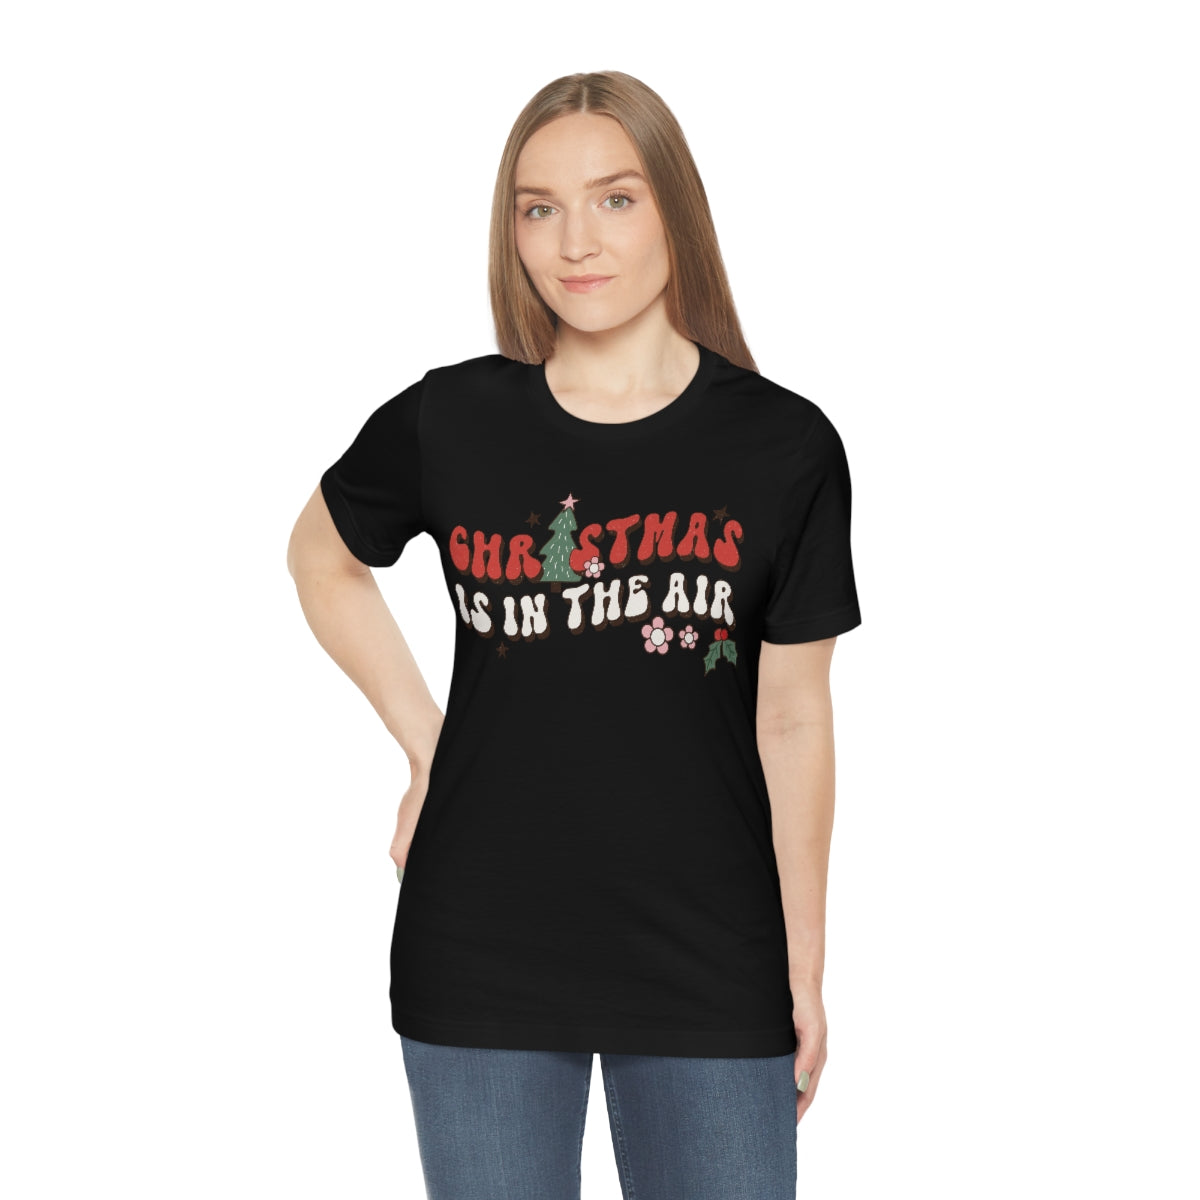 Christmas Is in The Air Christmas Tree Shirt For Adults